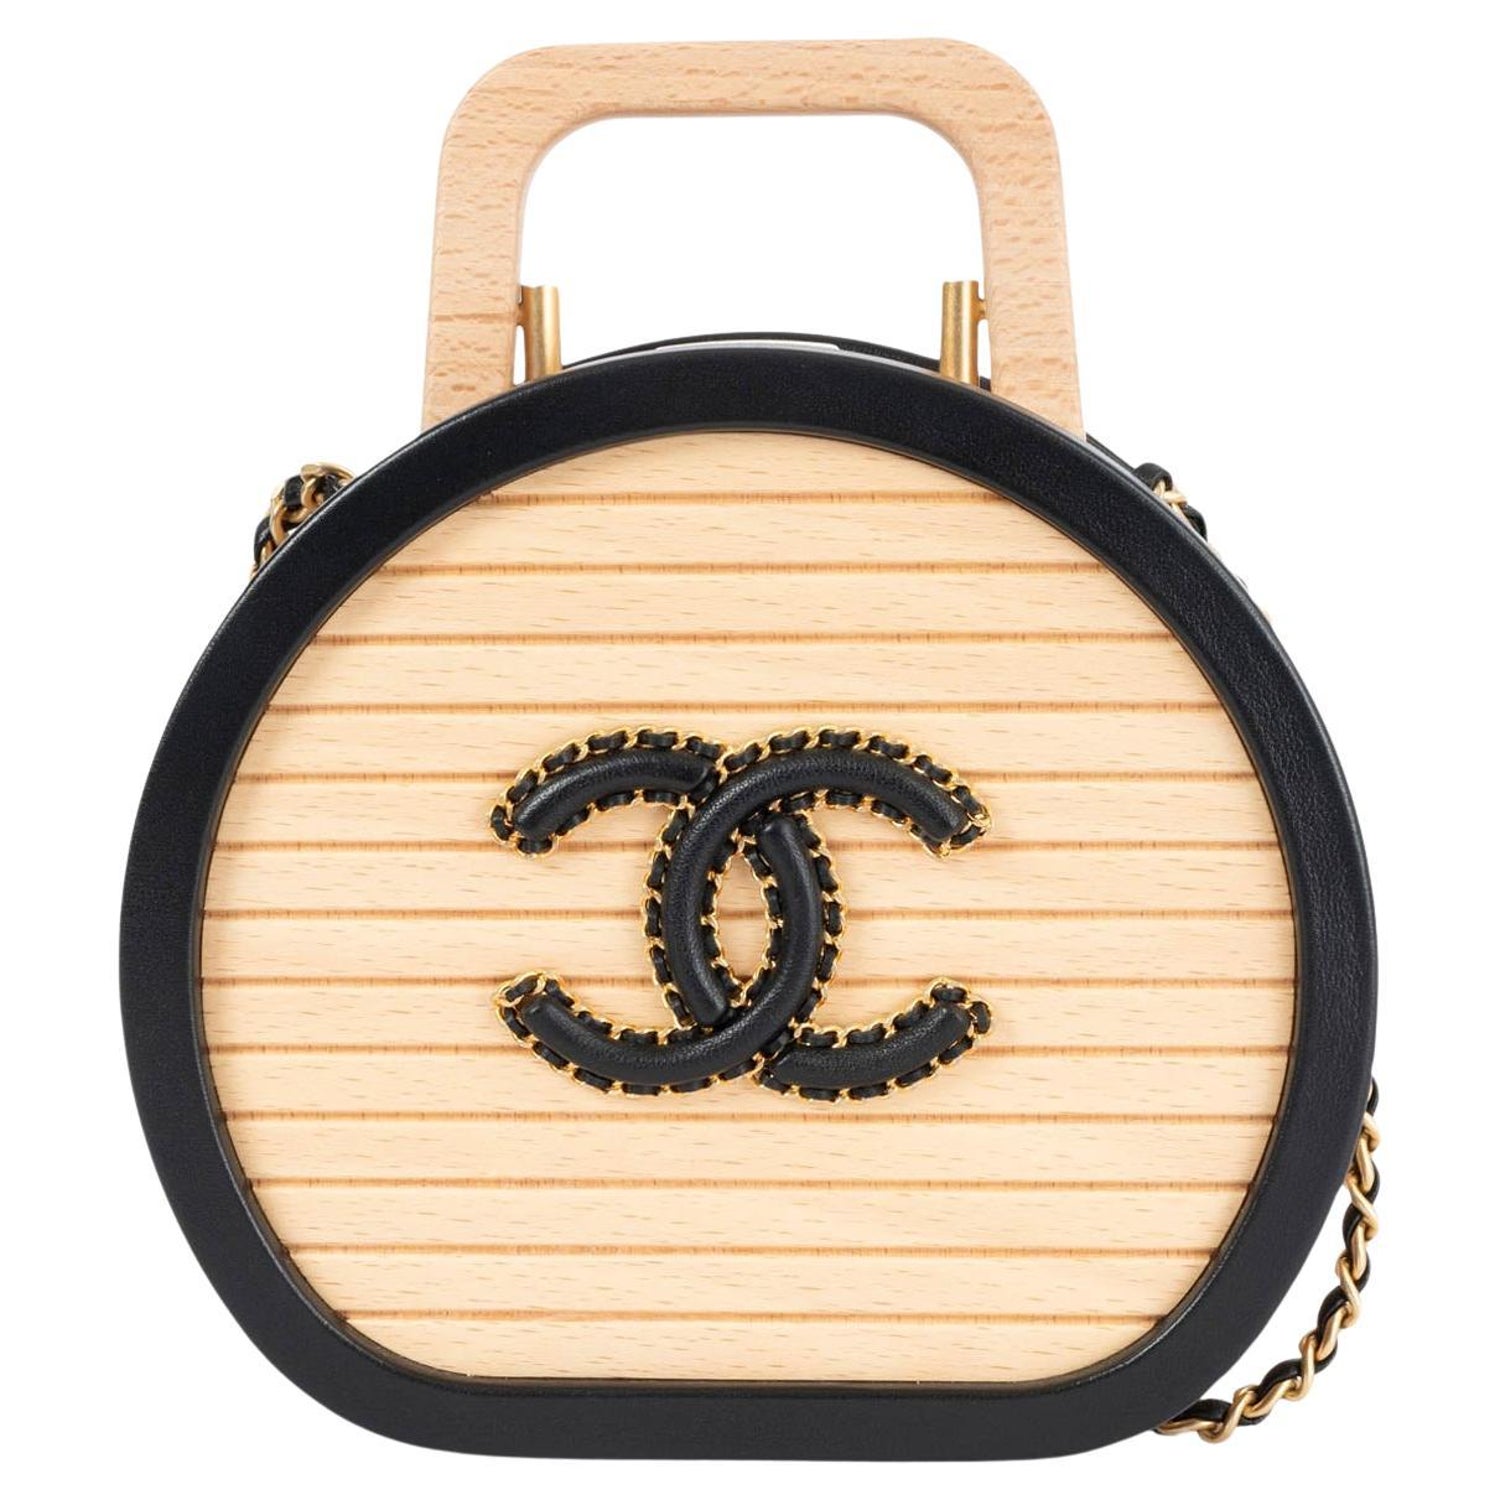 100 Designs That Encapsulate the Power of Chanel - 1stDibs